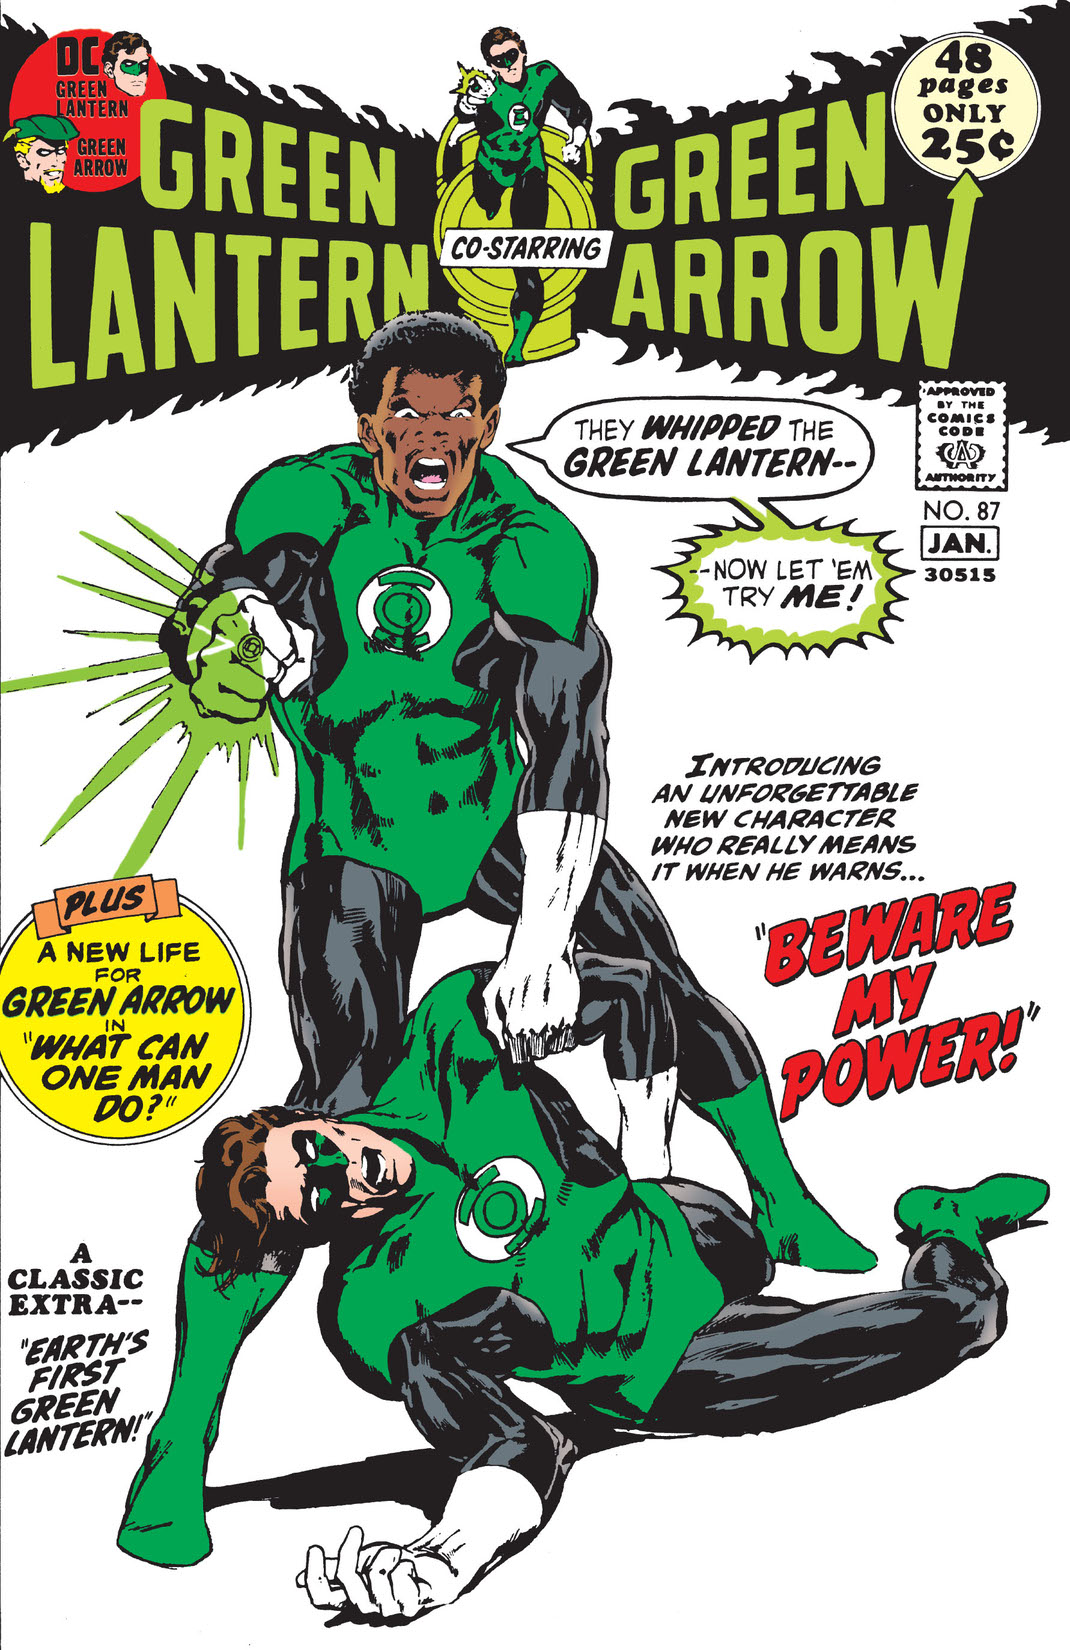 Green Lantern (1960-) #87 preview images